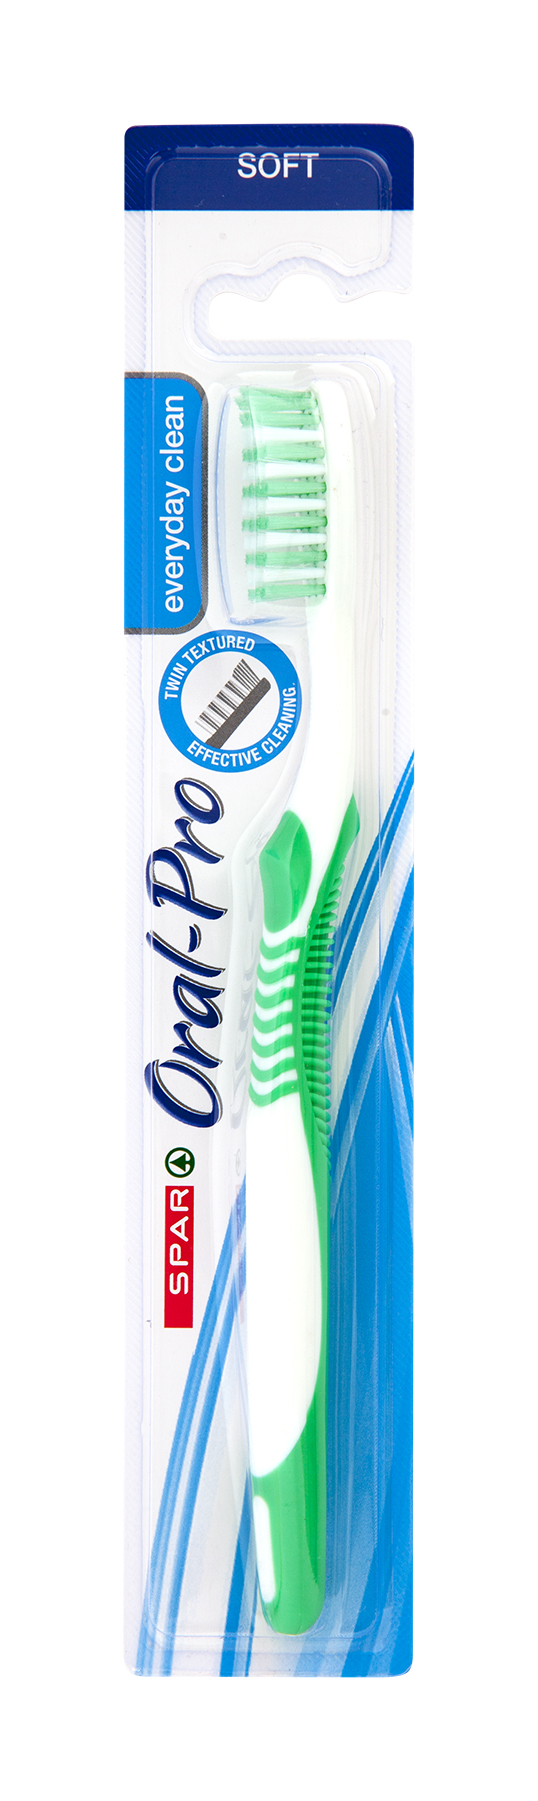 oral pro toothbrush everyday clean - soft